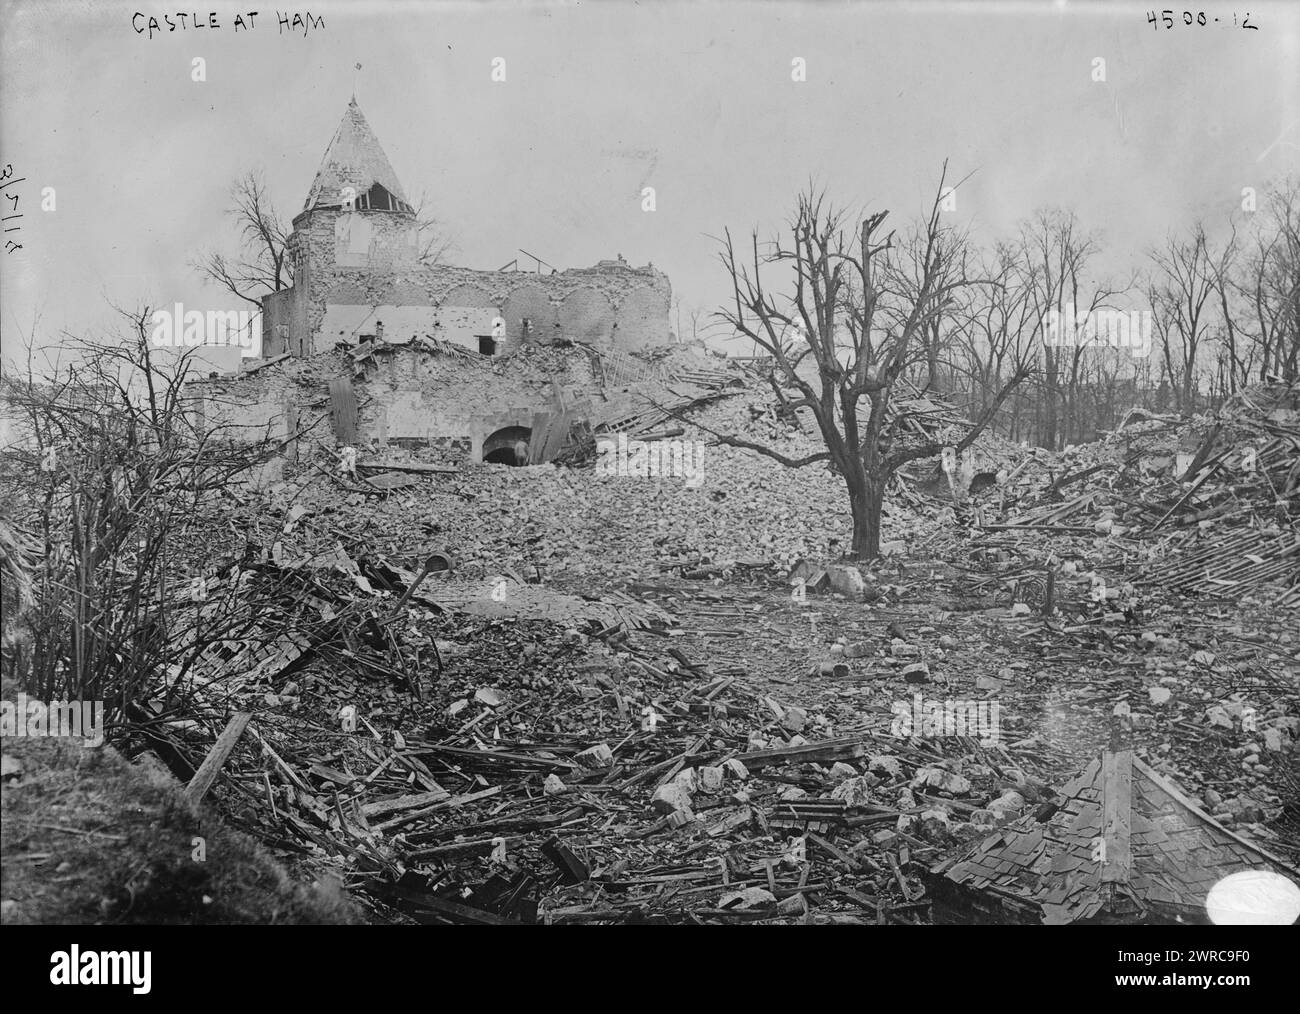 Castle at Ham, Photograph shows the Château de Ham (fort or forteresse de Ham), a castle in Ham, Somme department, France which was dynamited by the German forces on March 19, 1917 during World War I., 1918 March 2, World War, 1914-1918, Glass negatives, 1 negative: glass Stock Photo